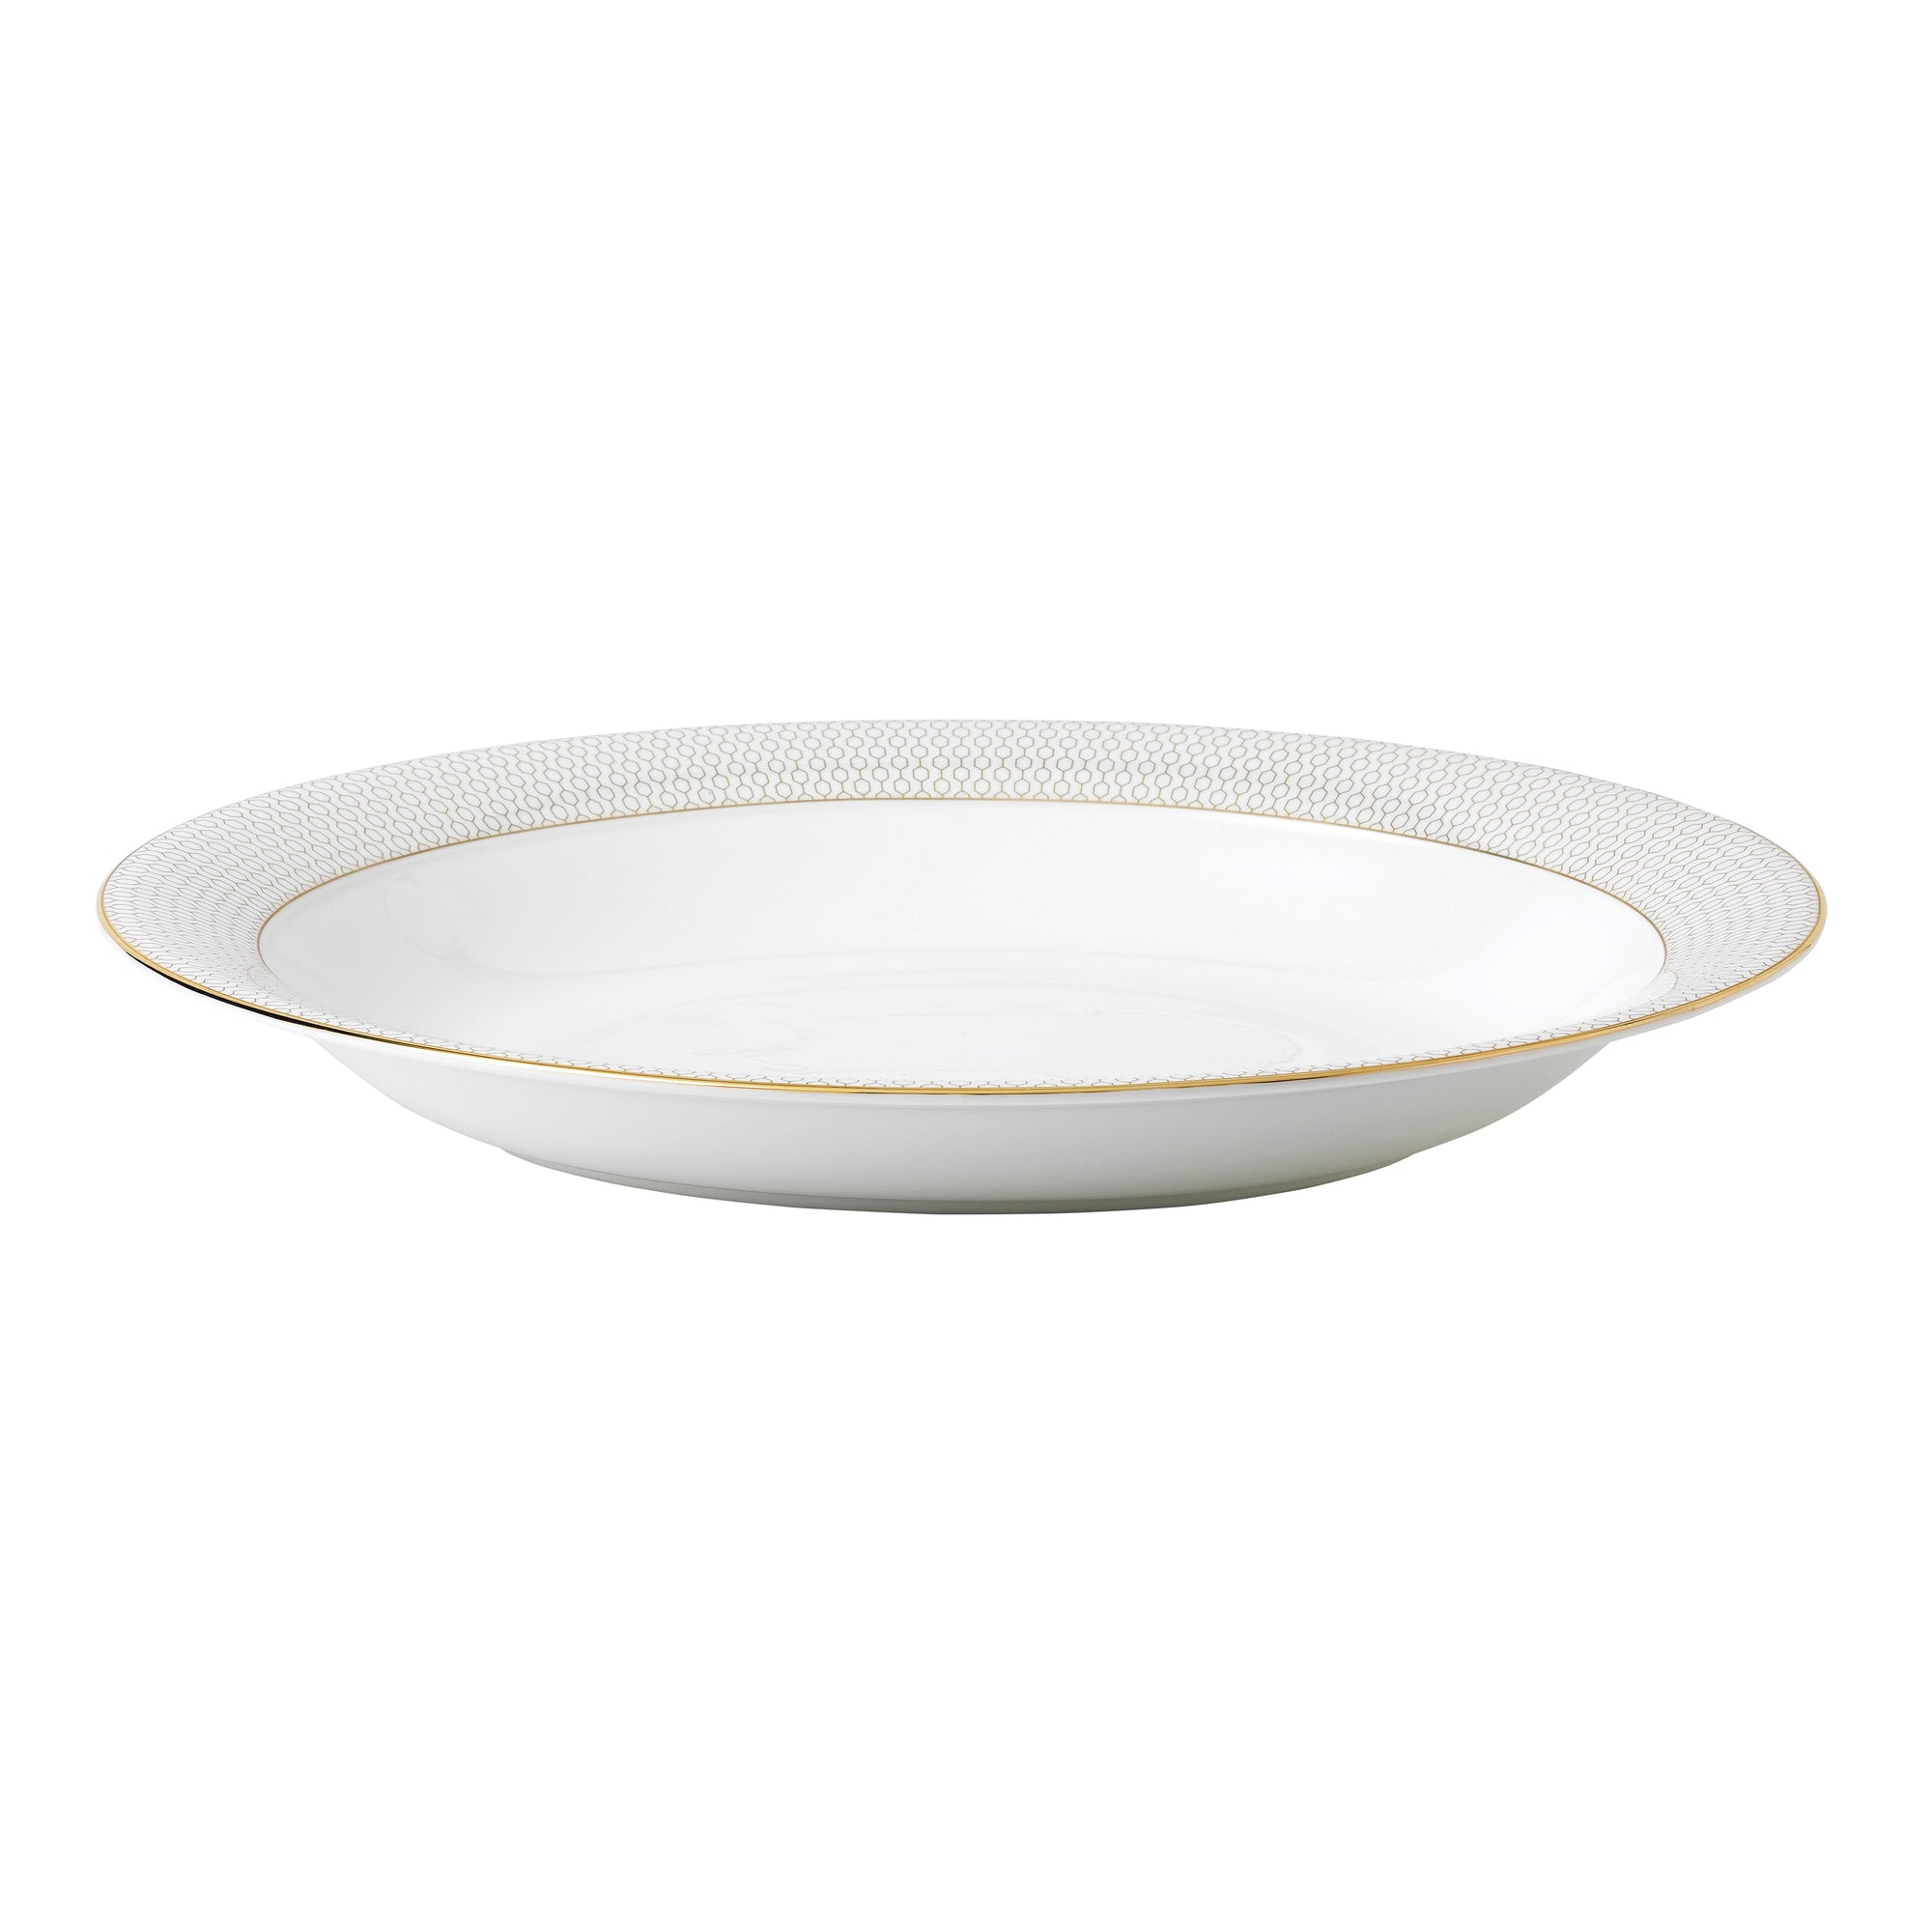 Wedgwood Gio Gold Oval Open Vegetable Dish